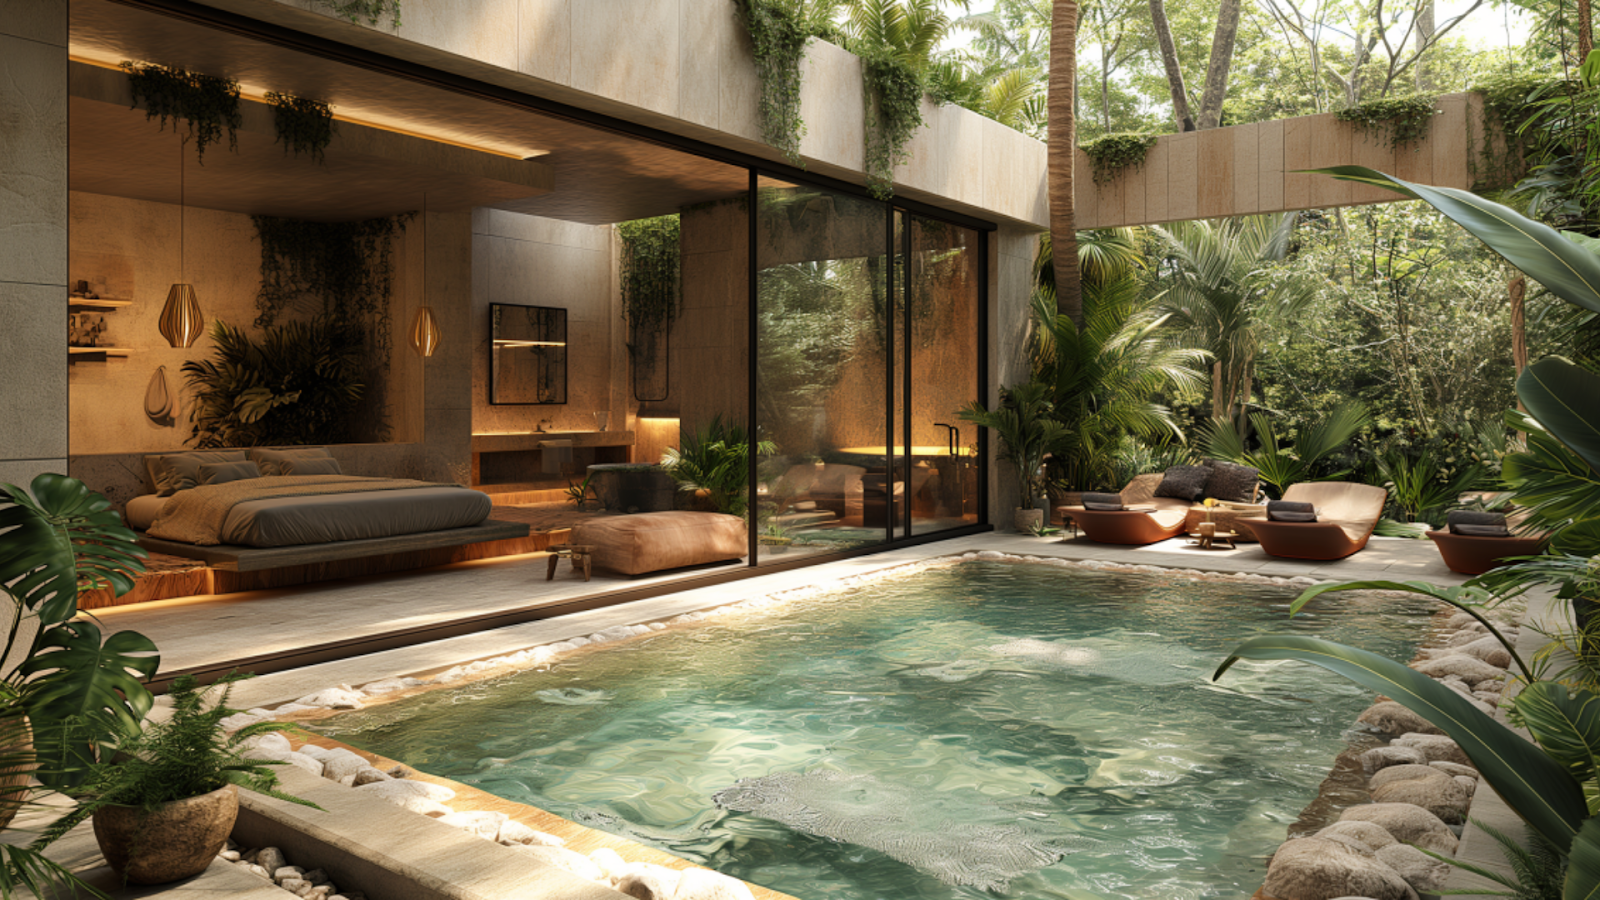 Luxury spa area inside a secluded villa in Playa del Carmen featuring tranquil design and natural elements